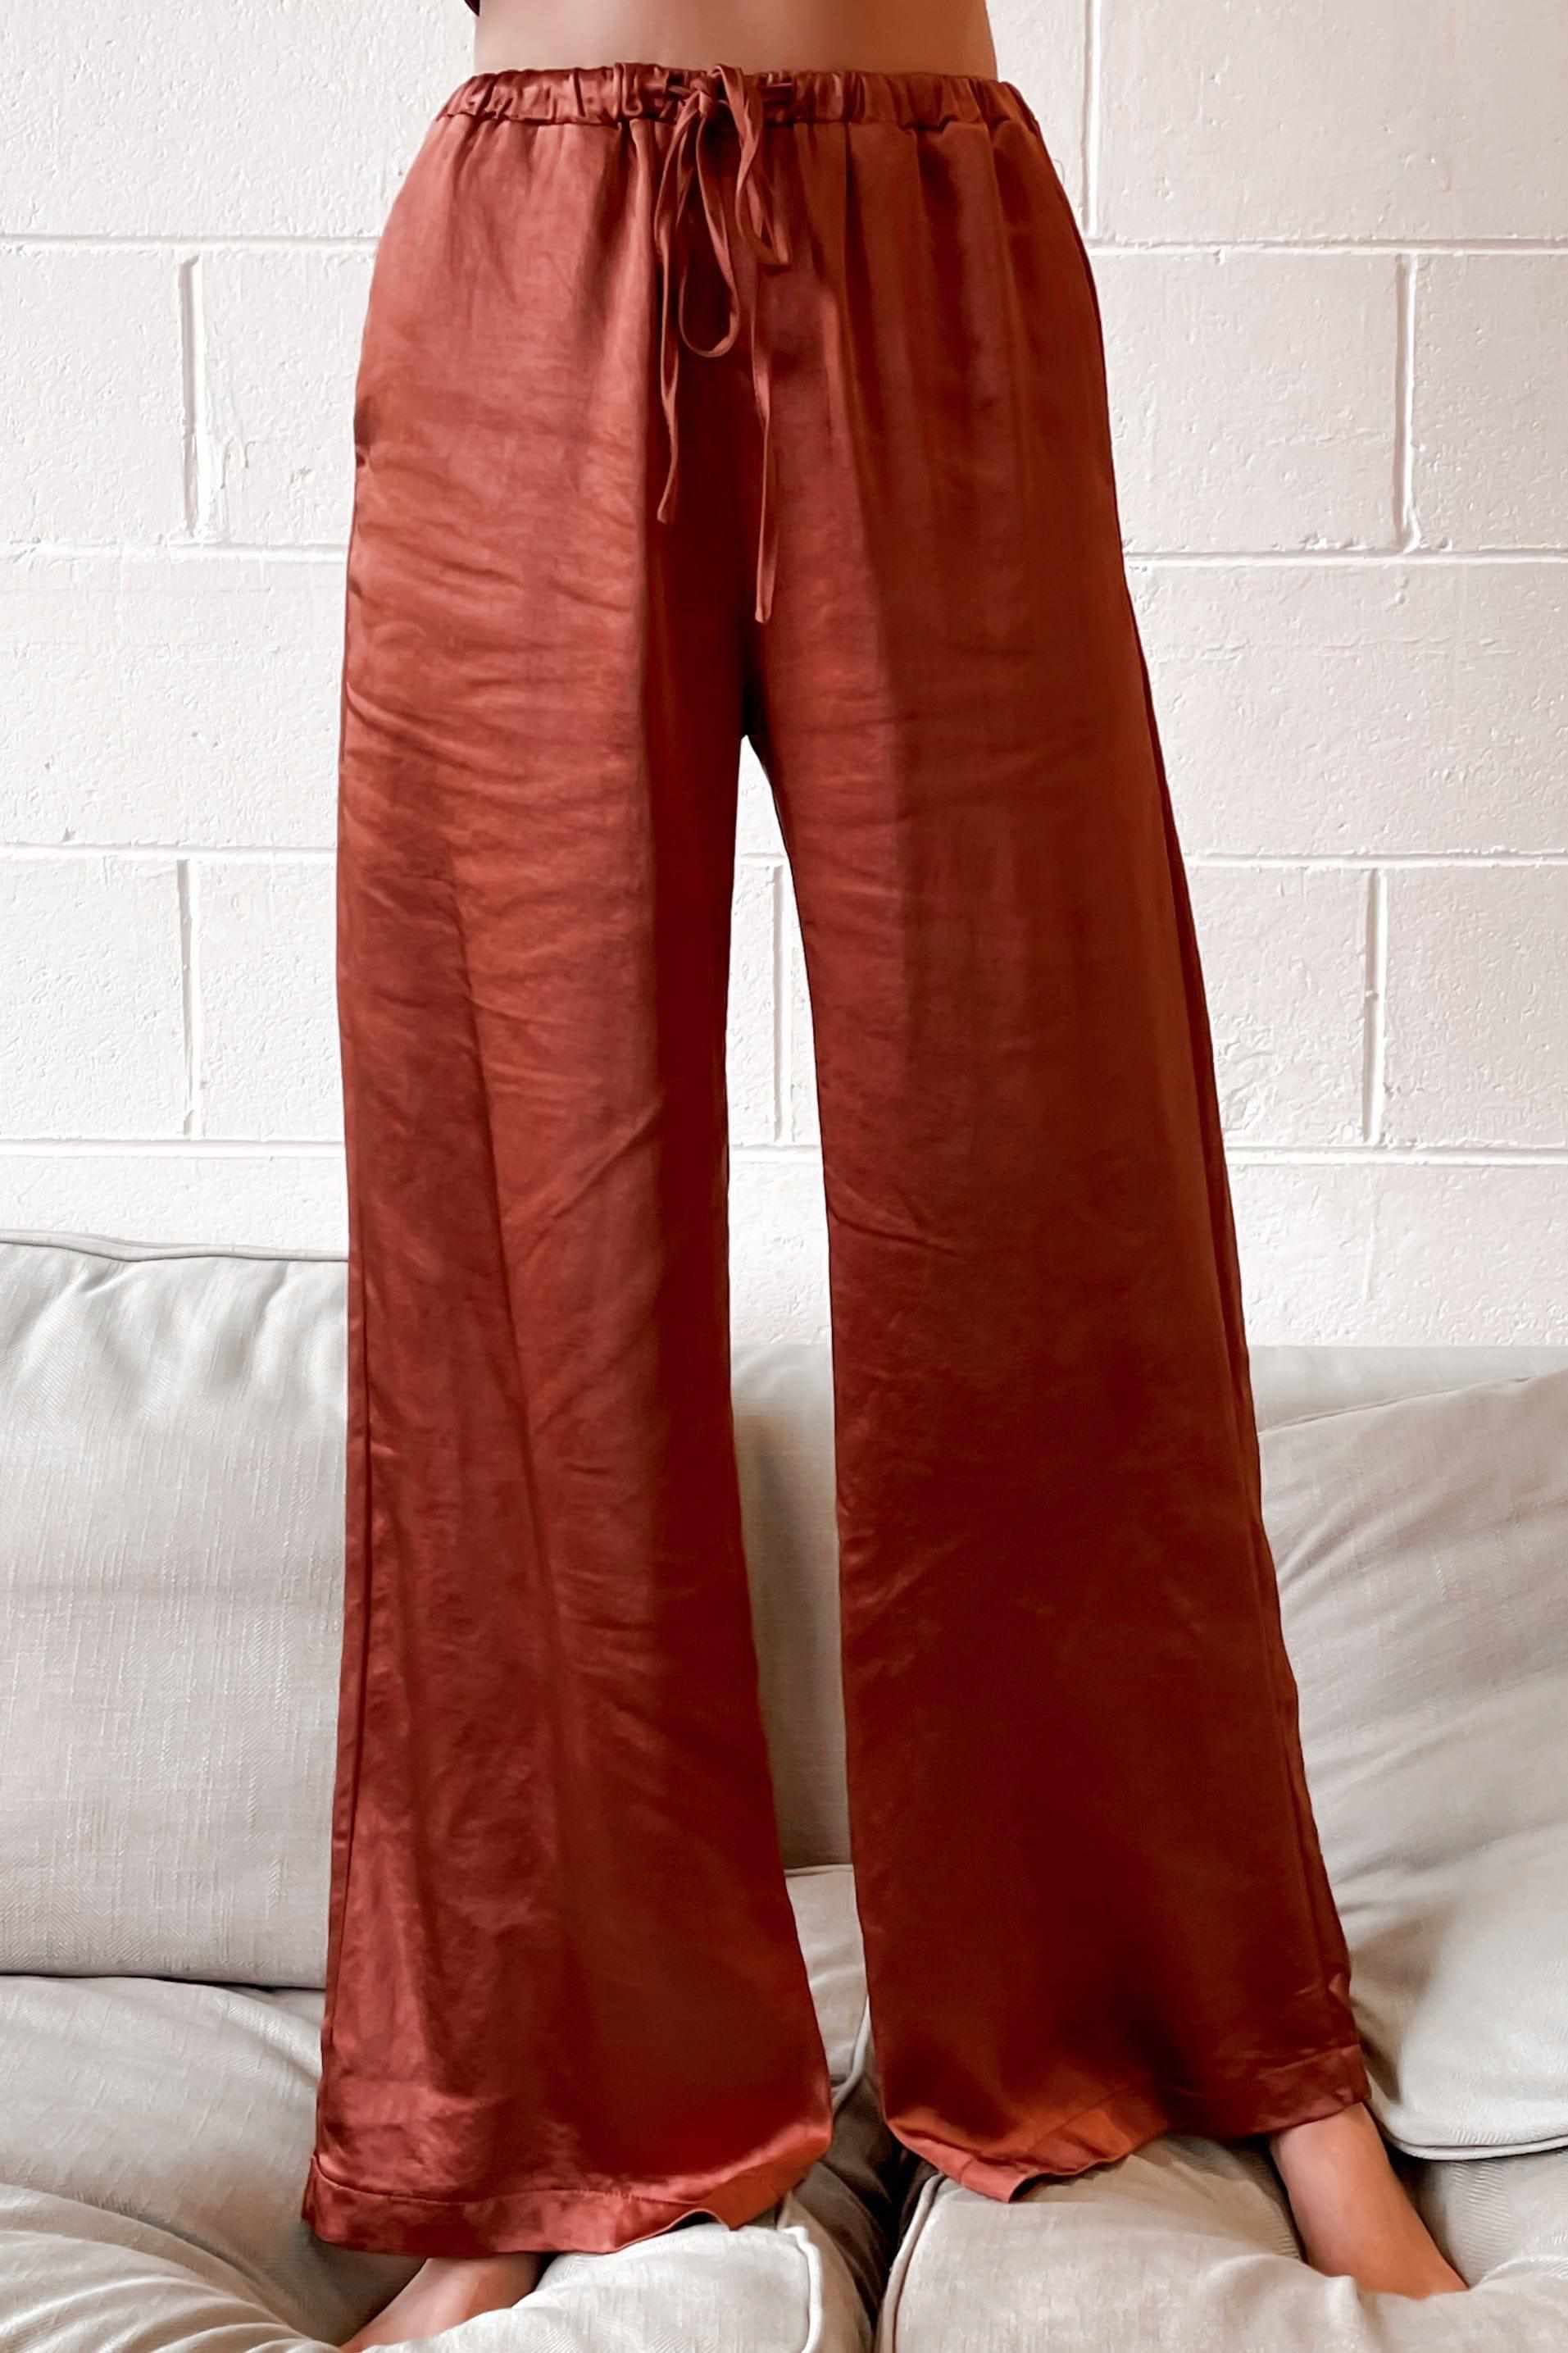 Meissa Pants, BOTTOMS, PANTS, POLYESTER, RED, SETS, , Our New Meissa Pants is only $66.00-We Have The Latest Pants | Shorts | Skirts @ Mishkah Online Fashion Boutique-MISHKAH